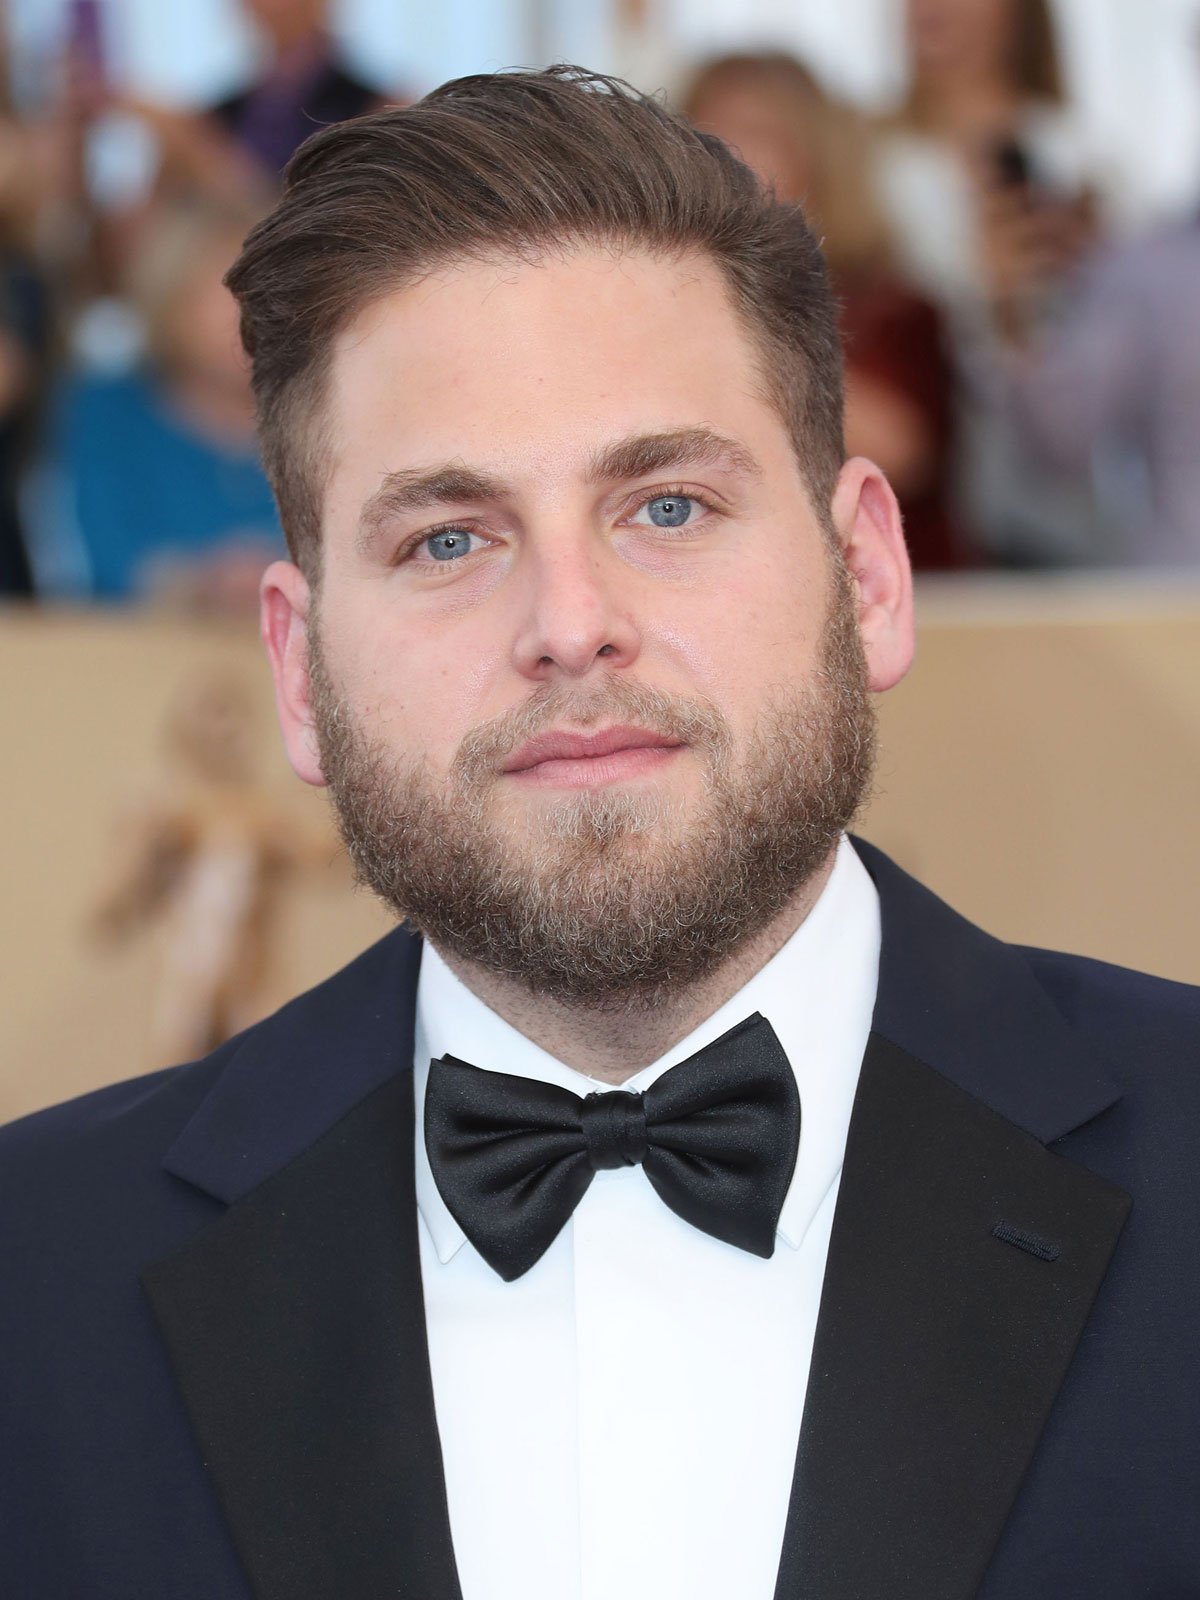 Jonah Hill / Jonah Hill Swears More Than Any Other Actor in Film ...